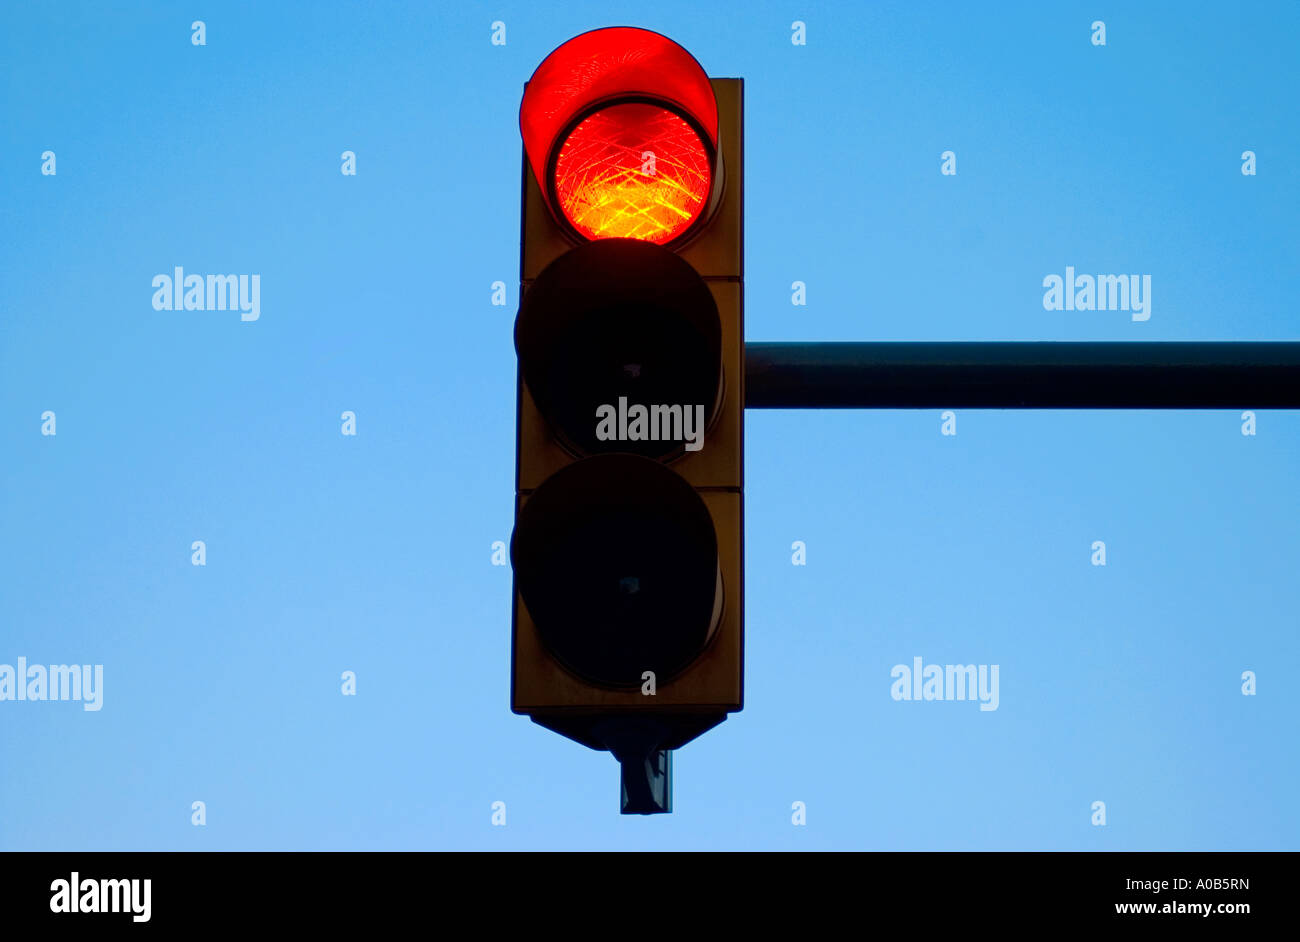 ROTE AMPEL ODER SIGNAL Stockfoto